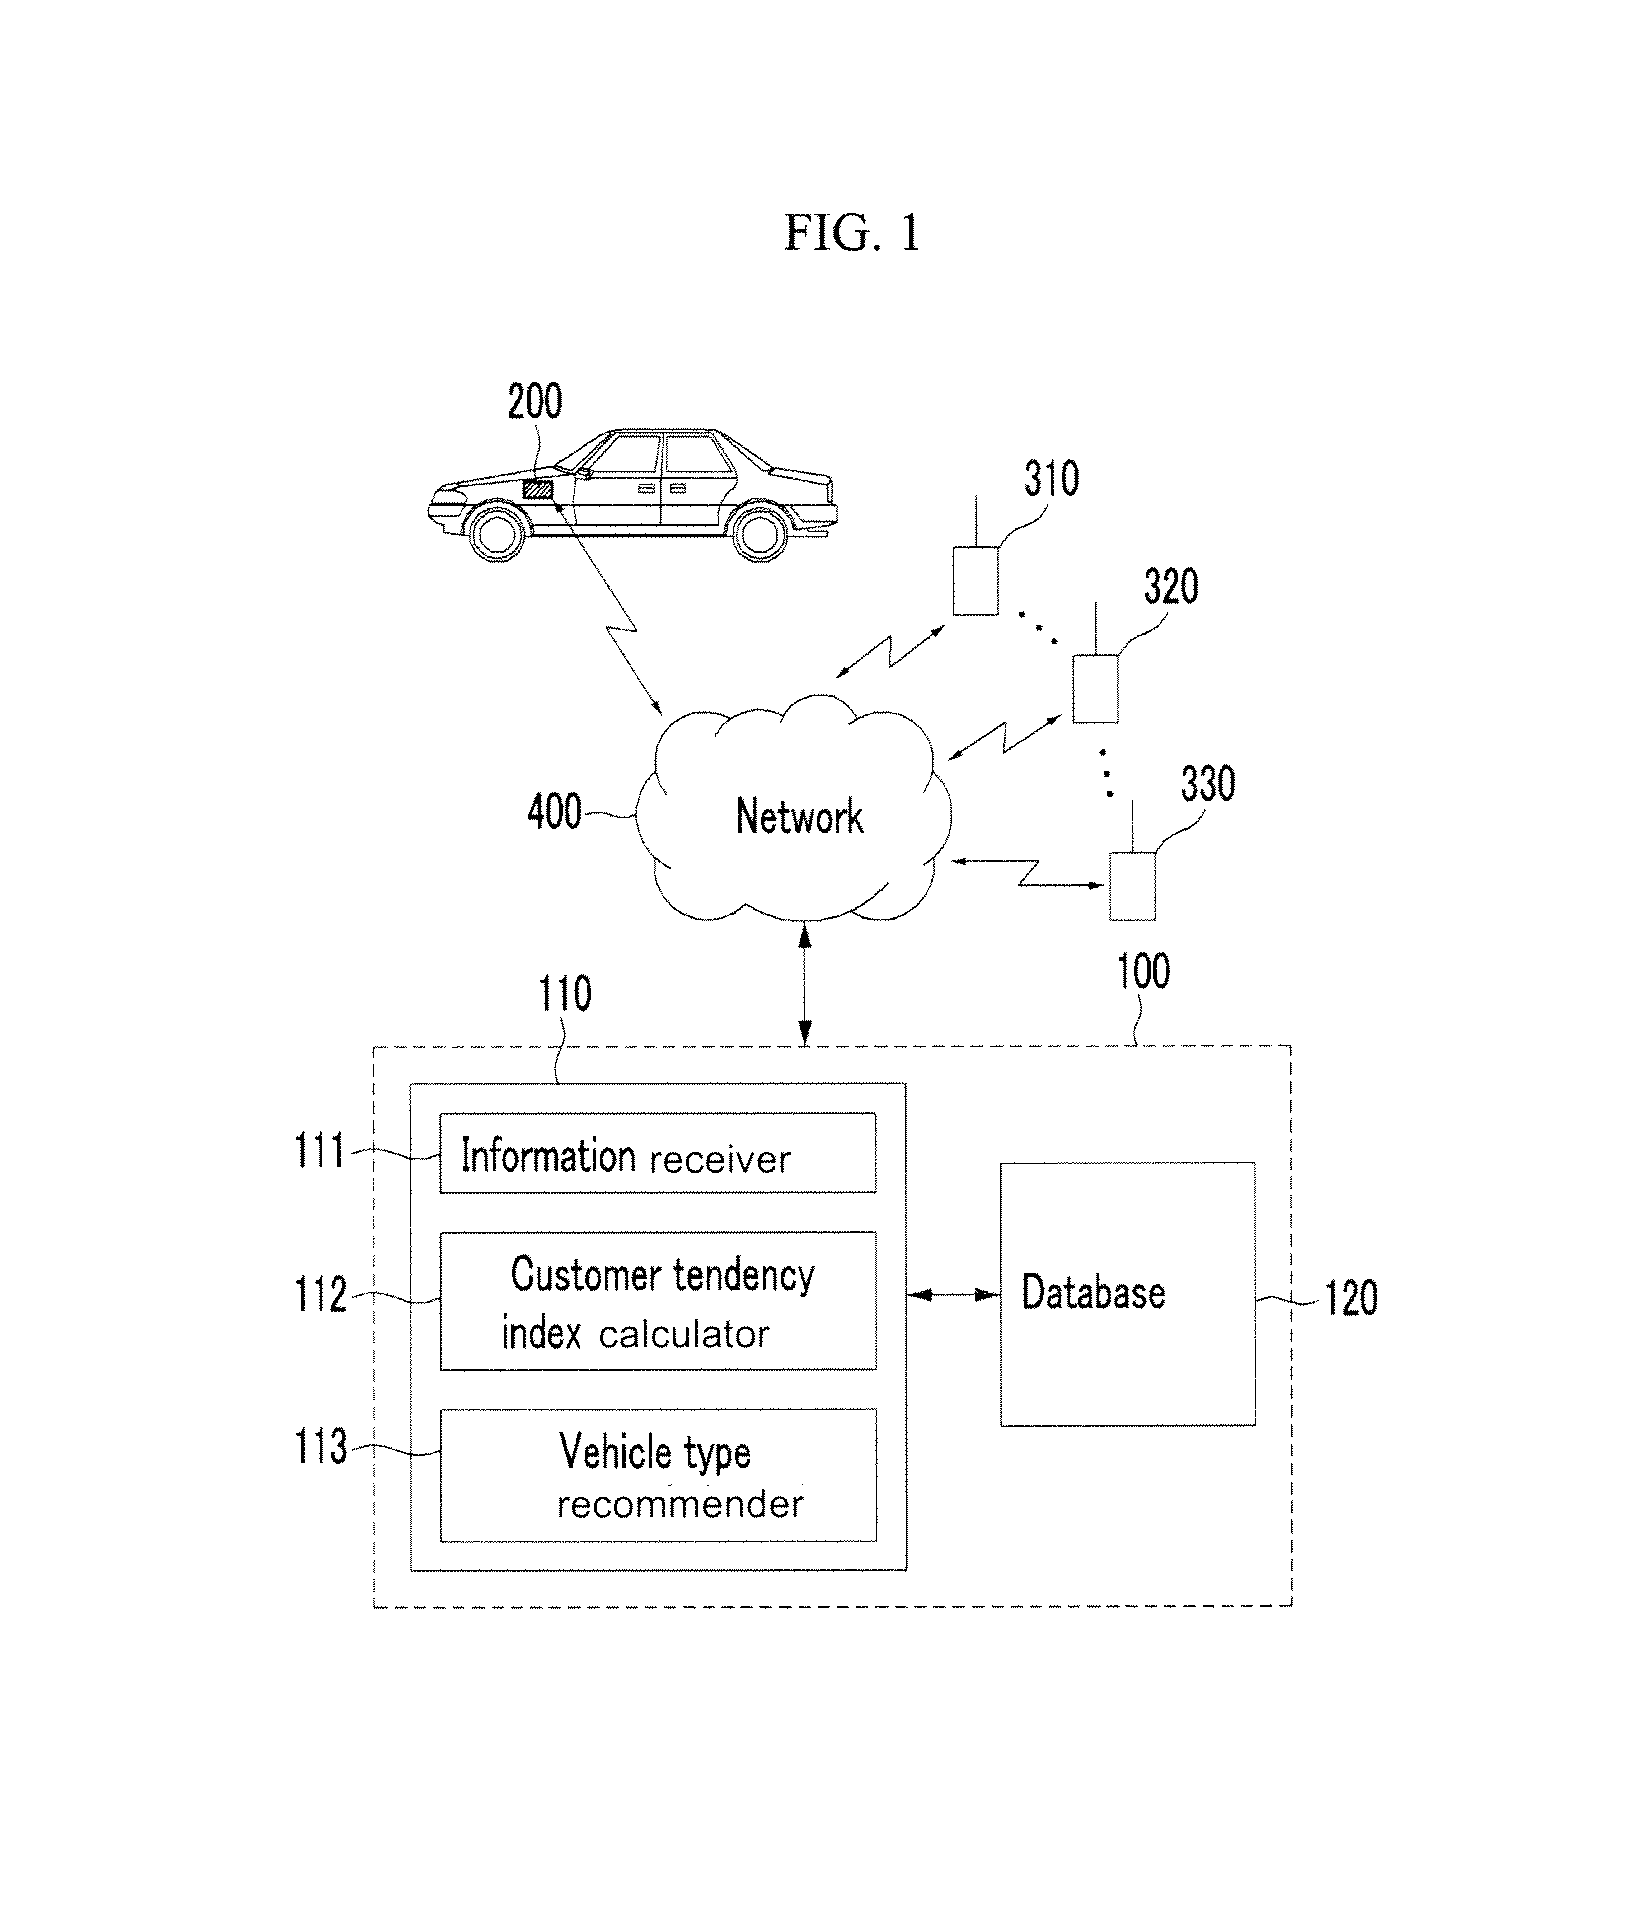 System and method of recommending type of vehicle based on customer use information and vehicle state